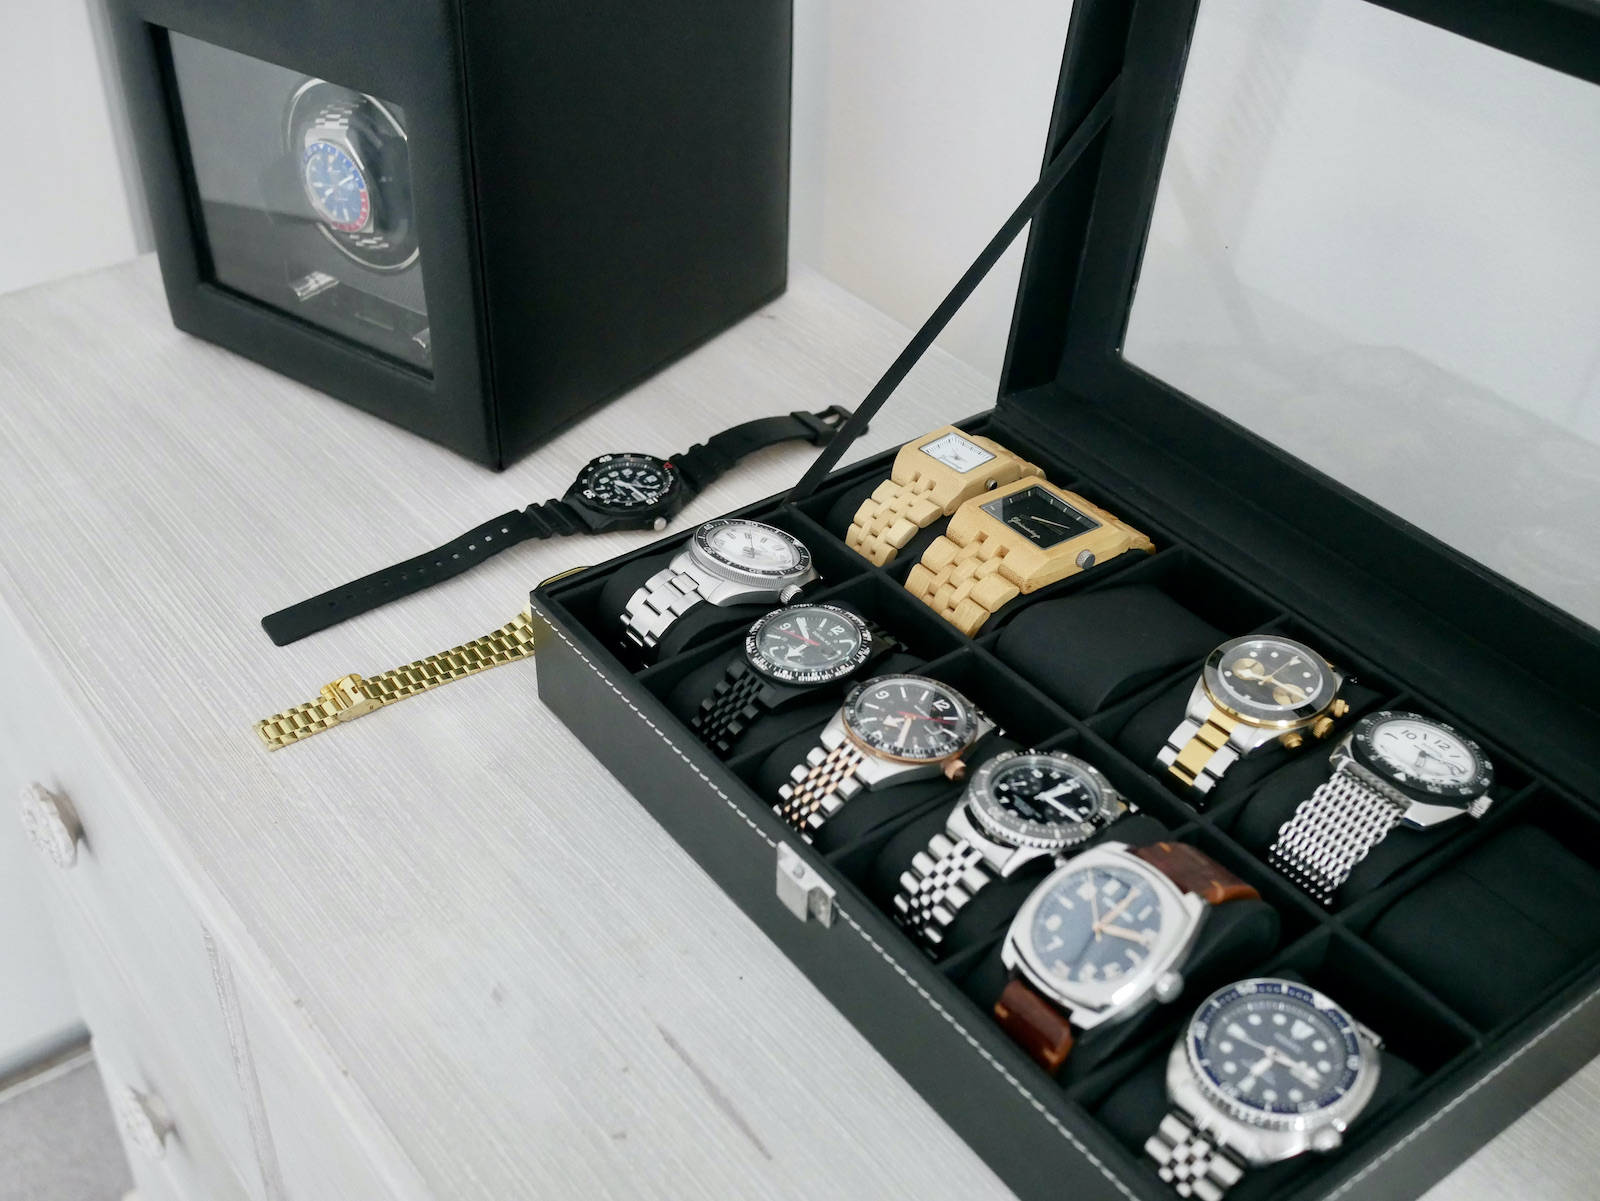 A personal collection of watches neatly arranged. A growing addiction?